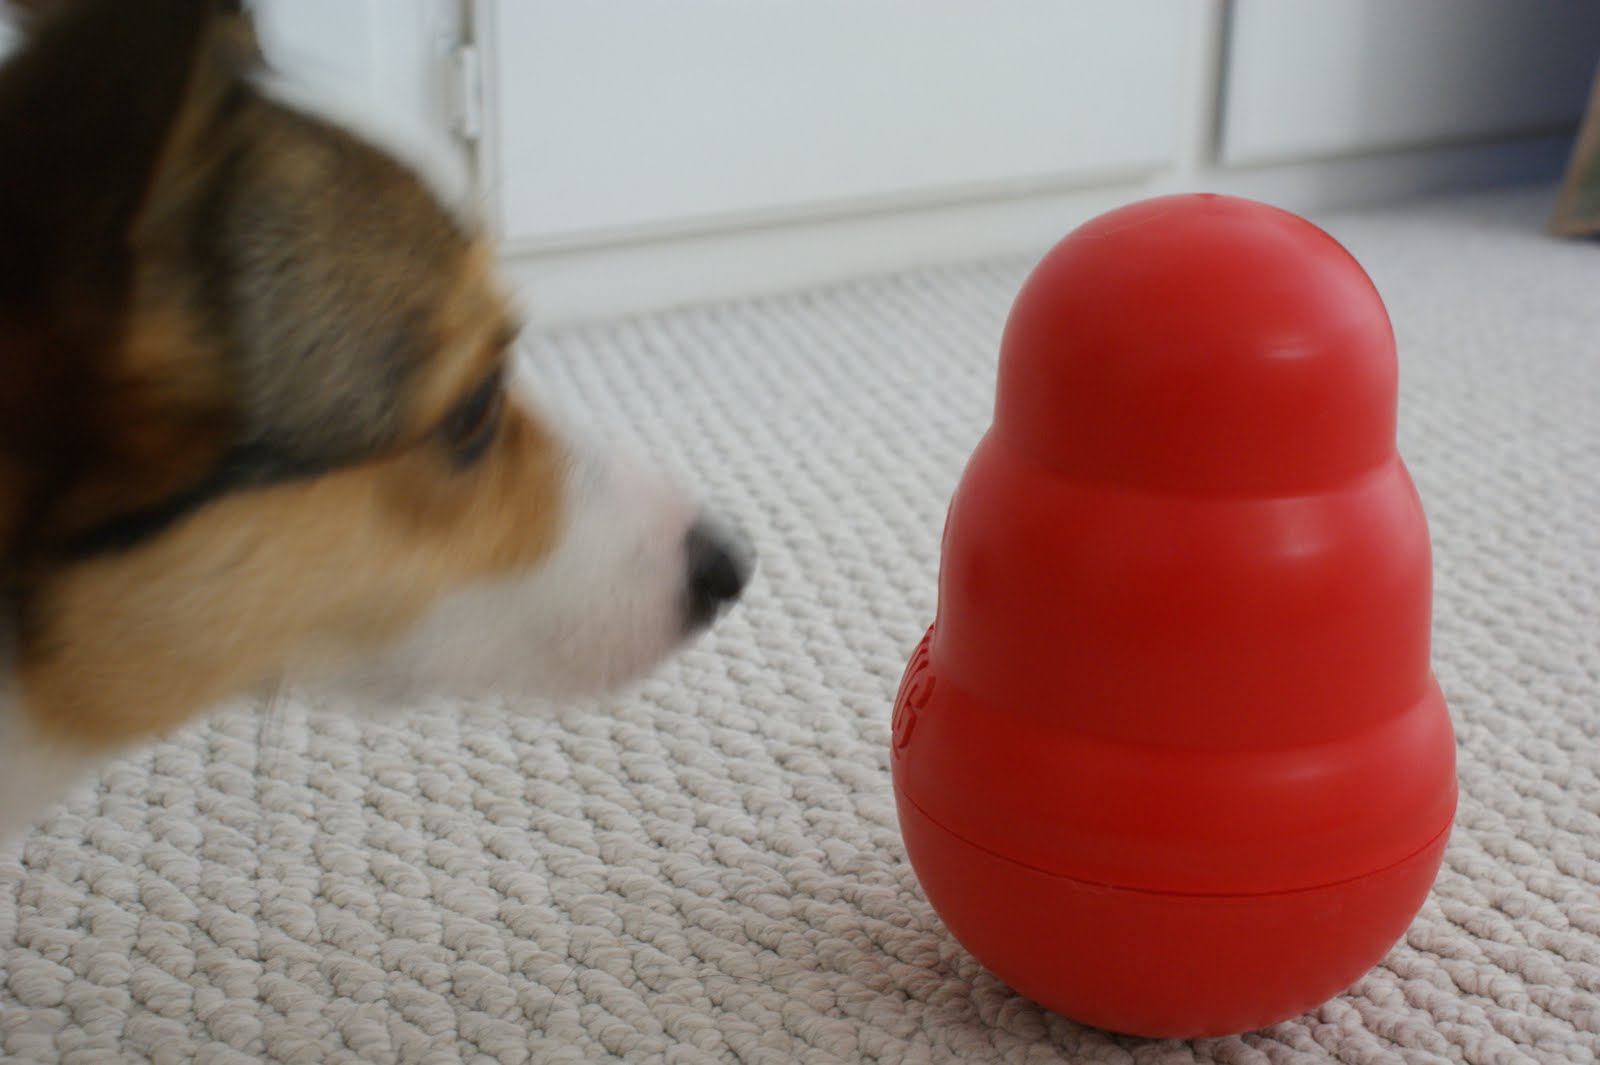 Kong Wobbler Review - Food Puzzle Toy